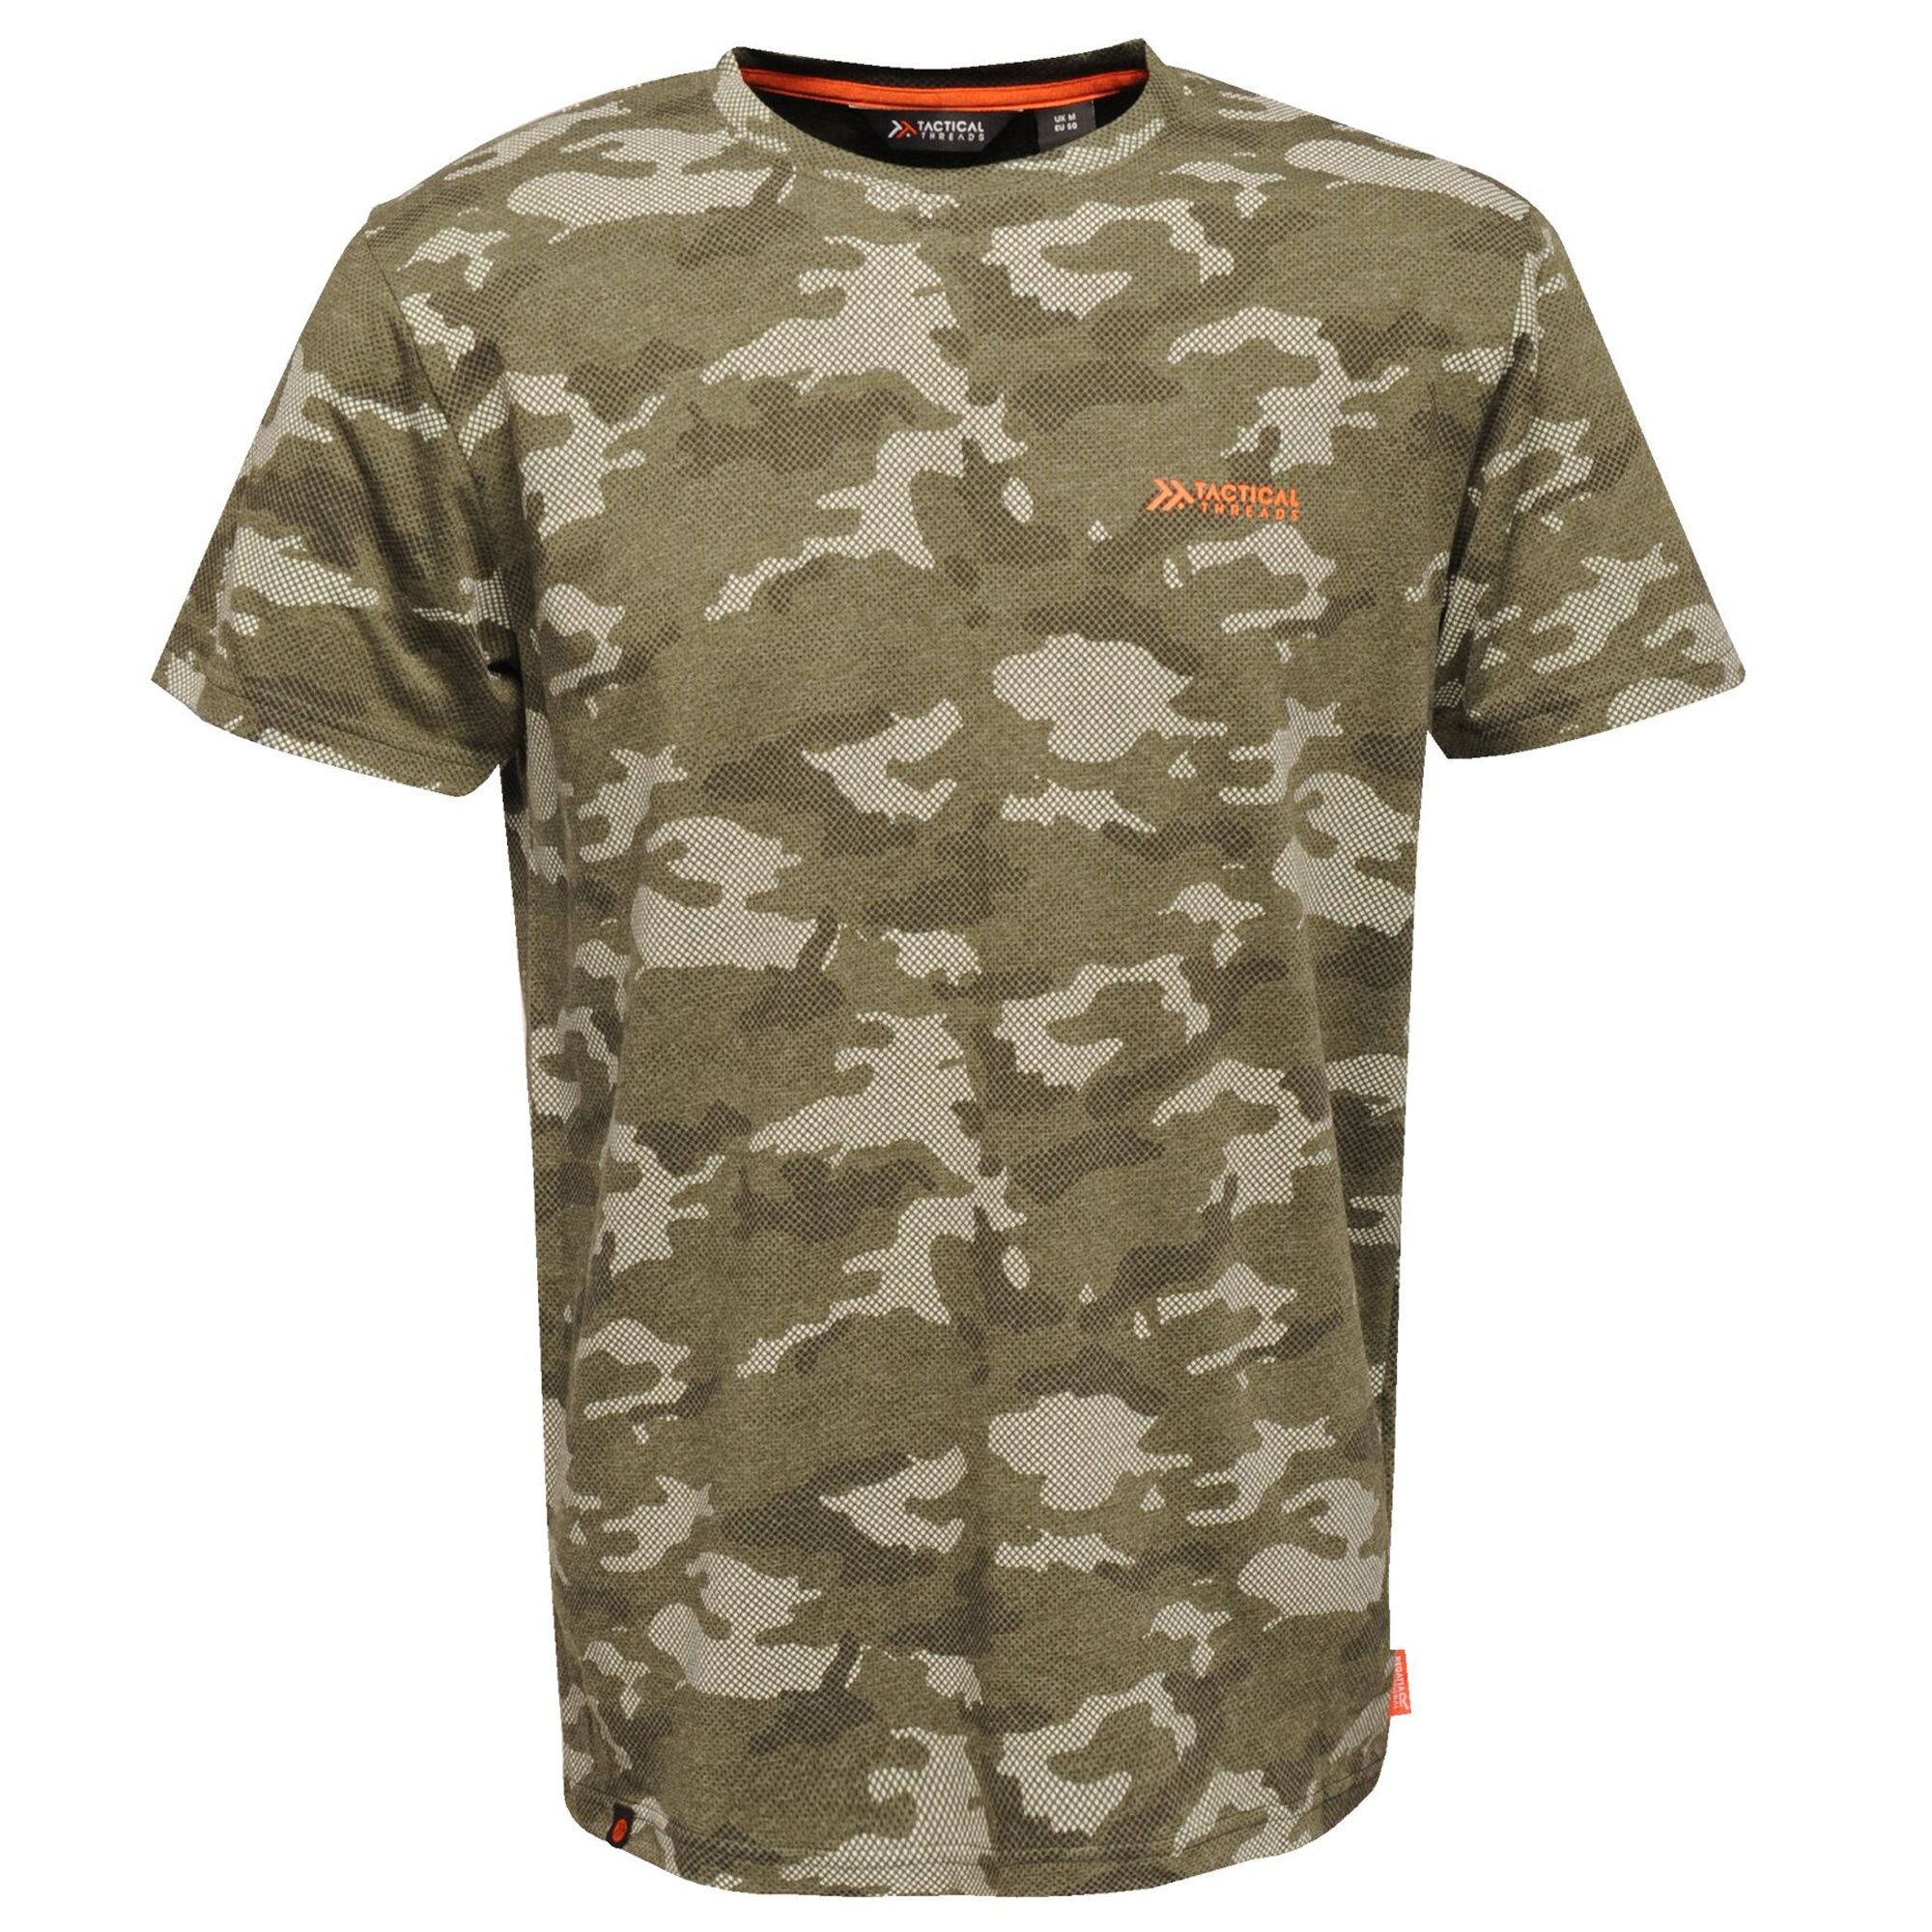 60% cotton, 40% polyester. Marl single jersey fabric. All over camouflage print. Part of the Tactical Threads range.